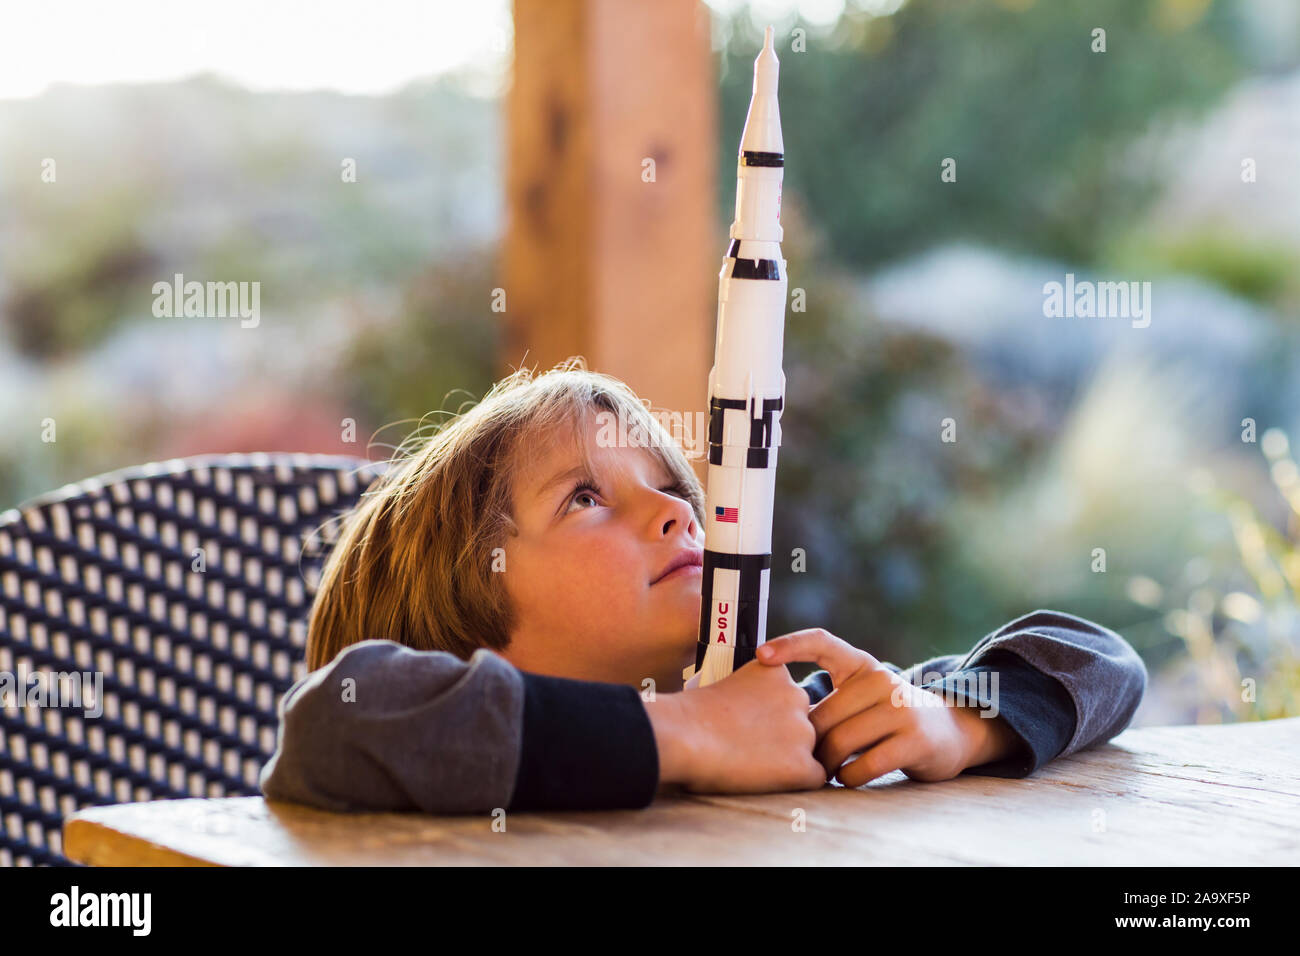 A boy playing with a toy Nasa Saturn 5 rocket, day dreaming about space flight. Stock Photo